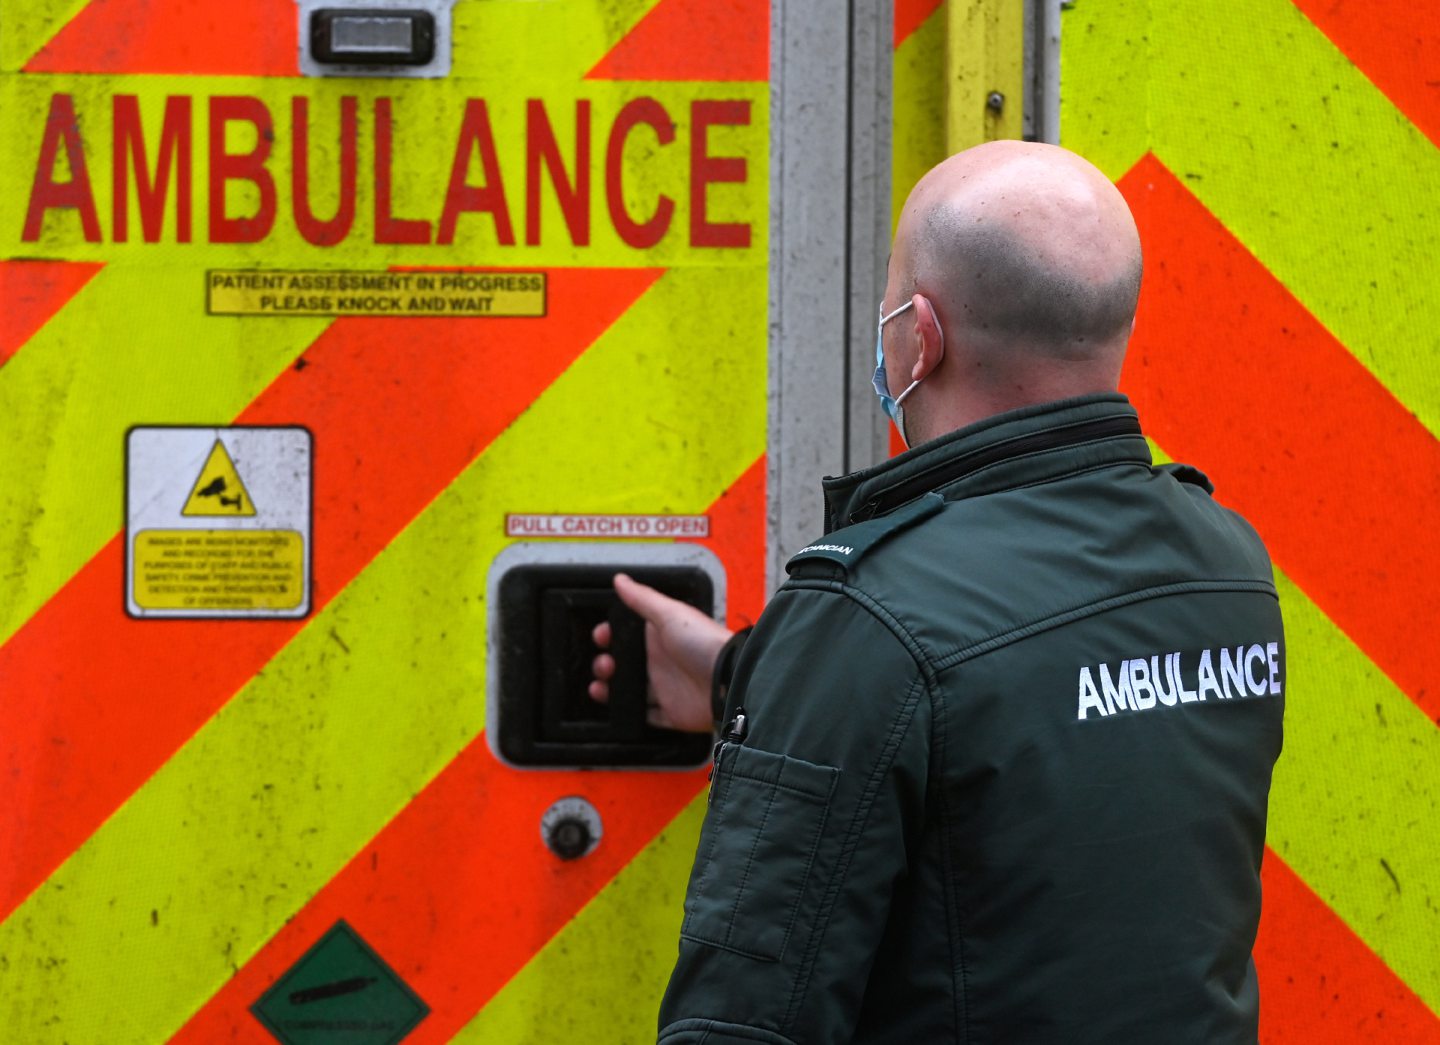 Paramedics are being encouraged to call the system before taking patients to A&E in Aberdeen. Image: Scott Baxter/ DC Thomson